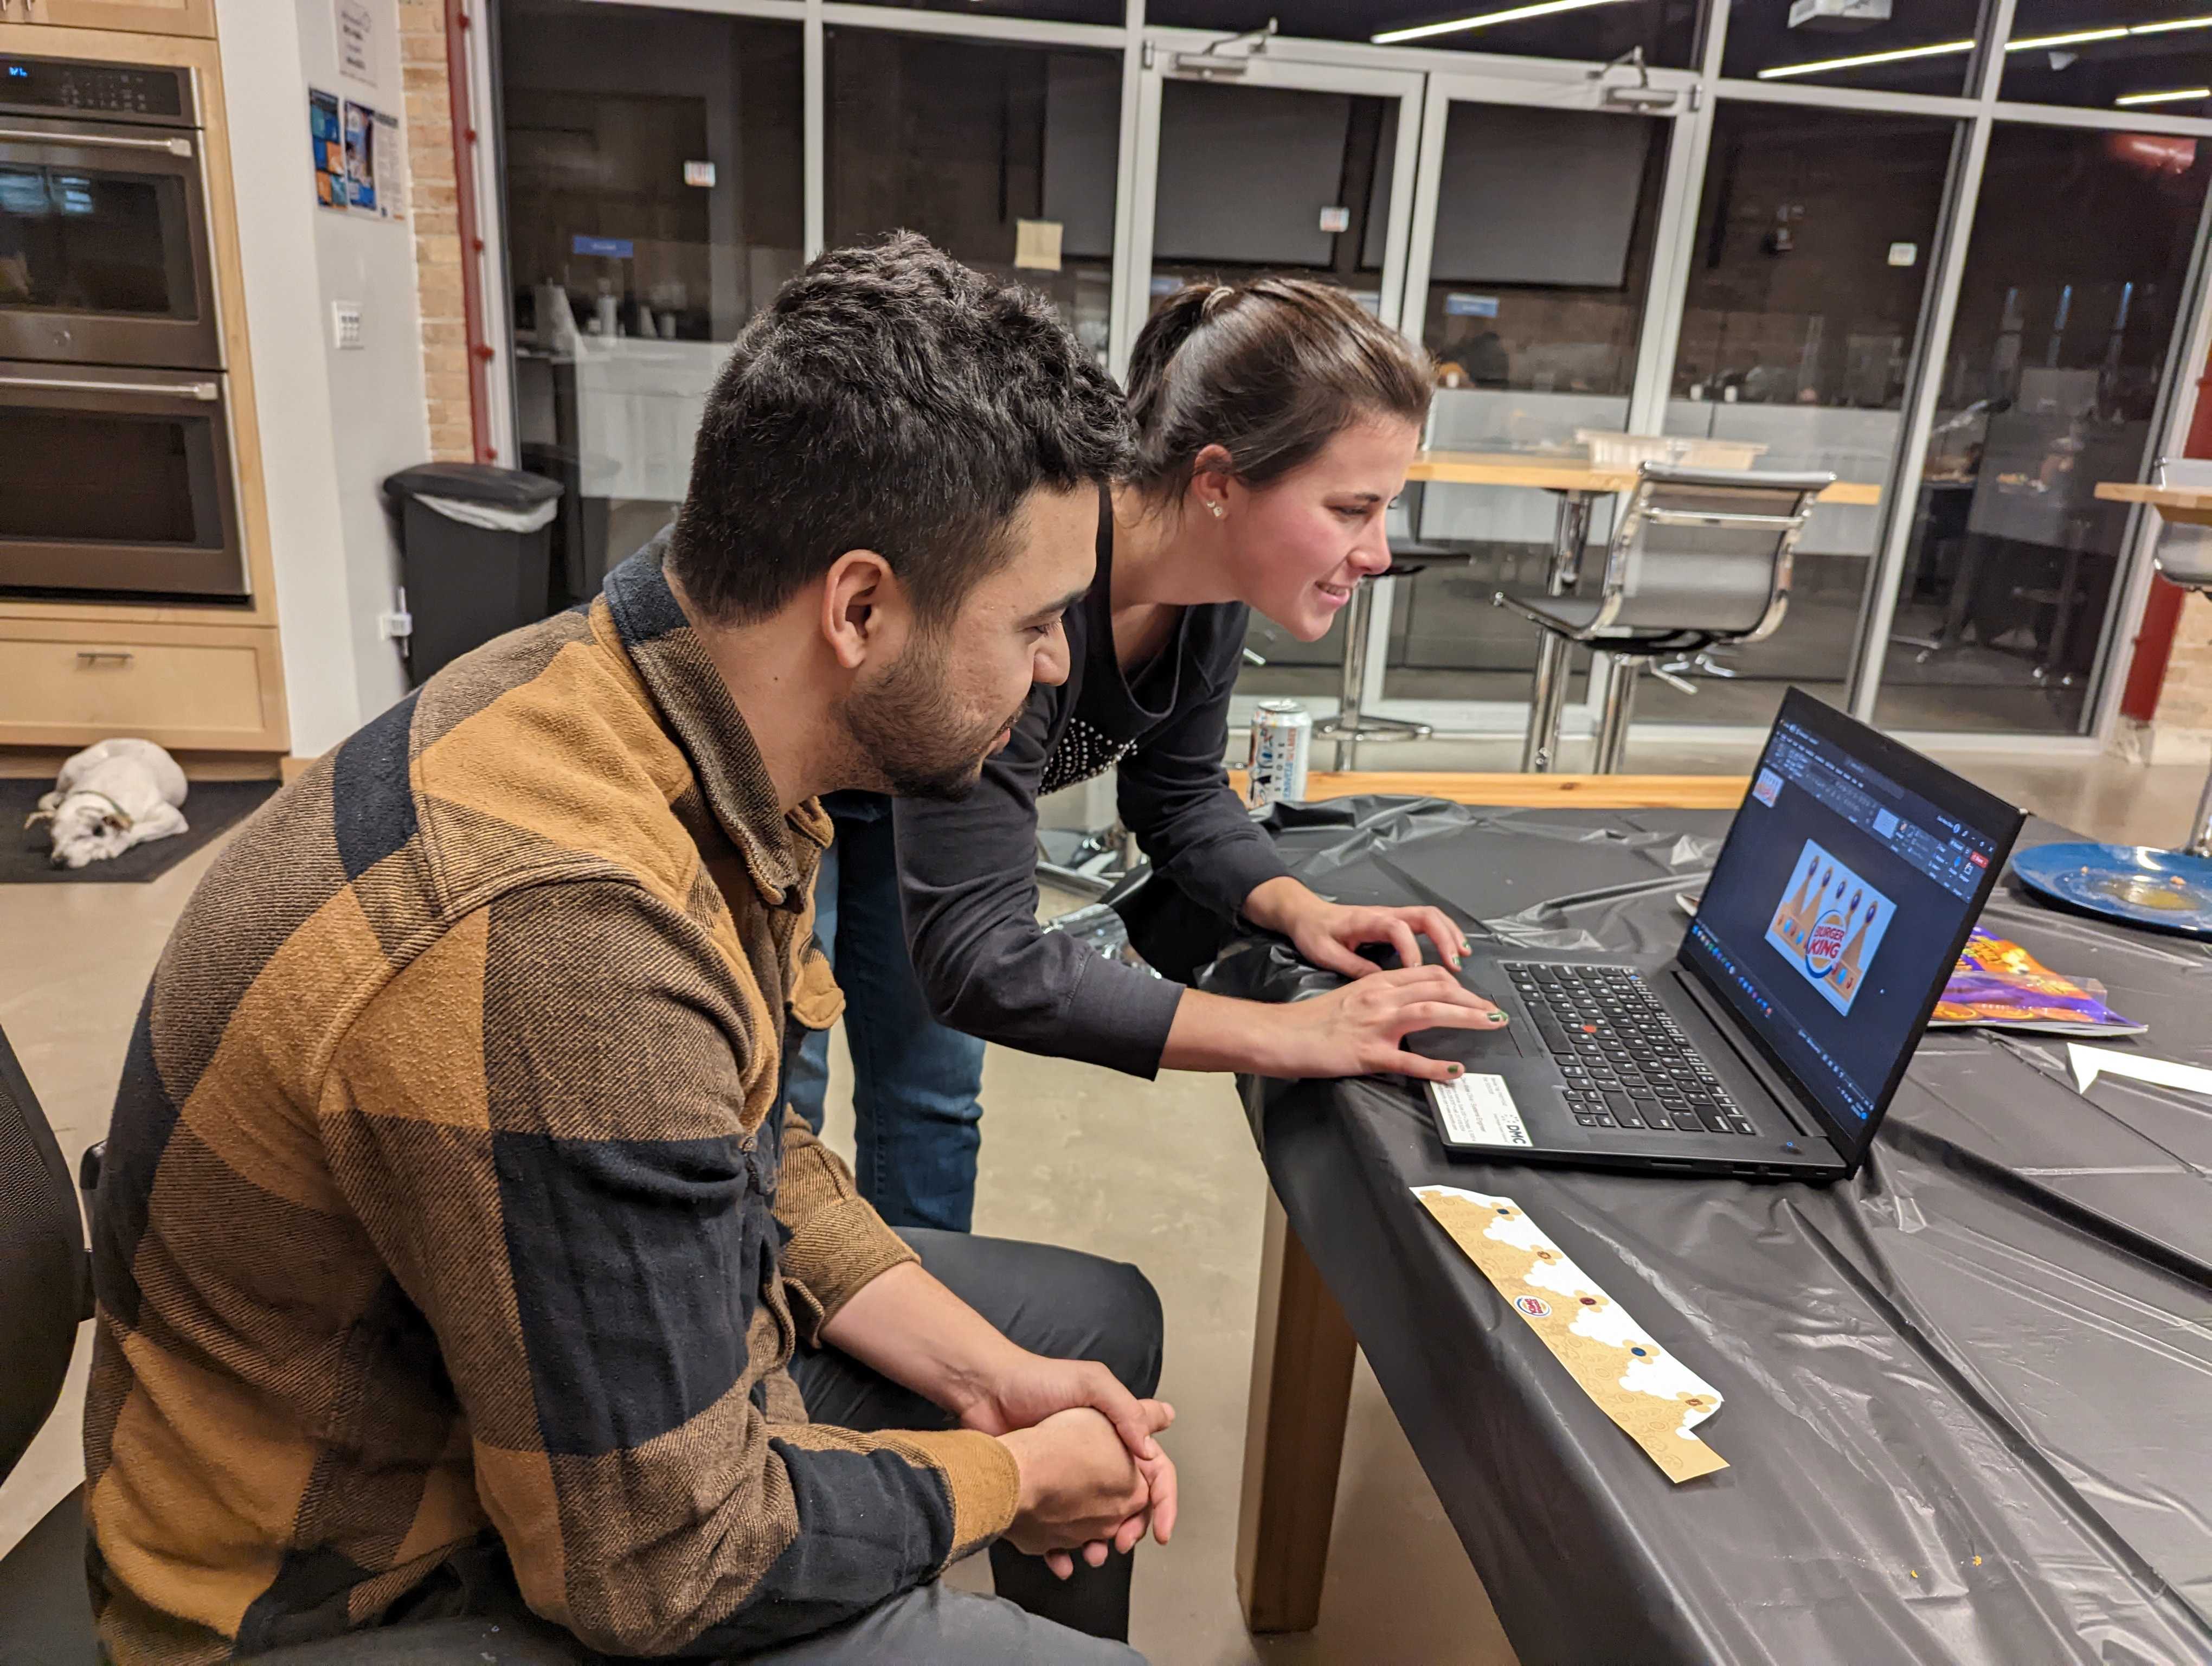 Two people looking at a computer screen